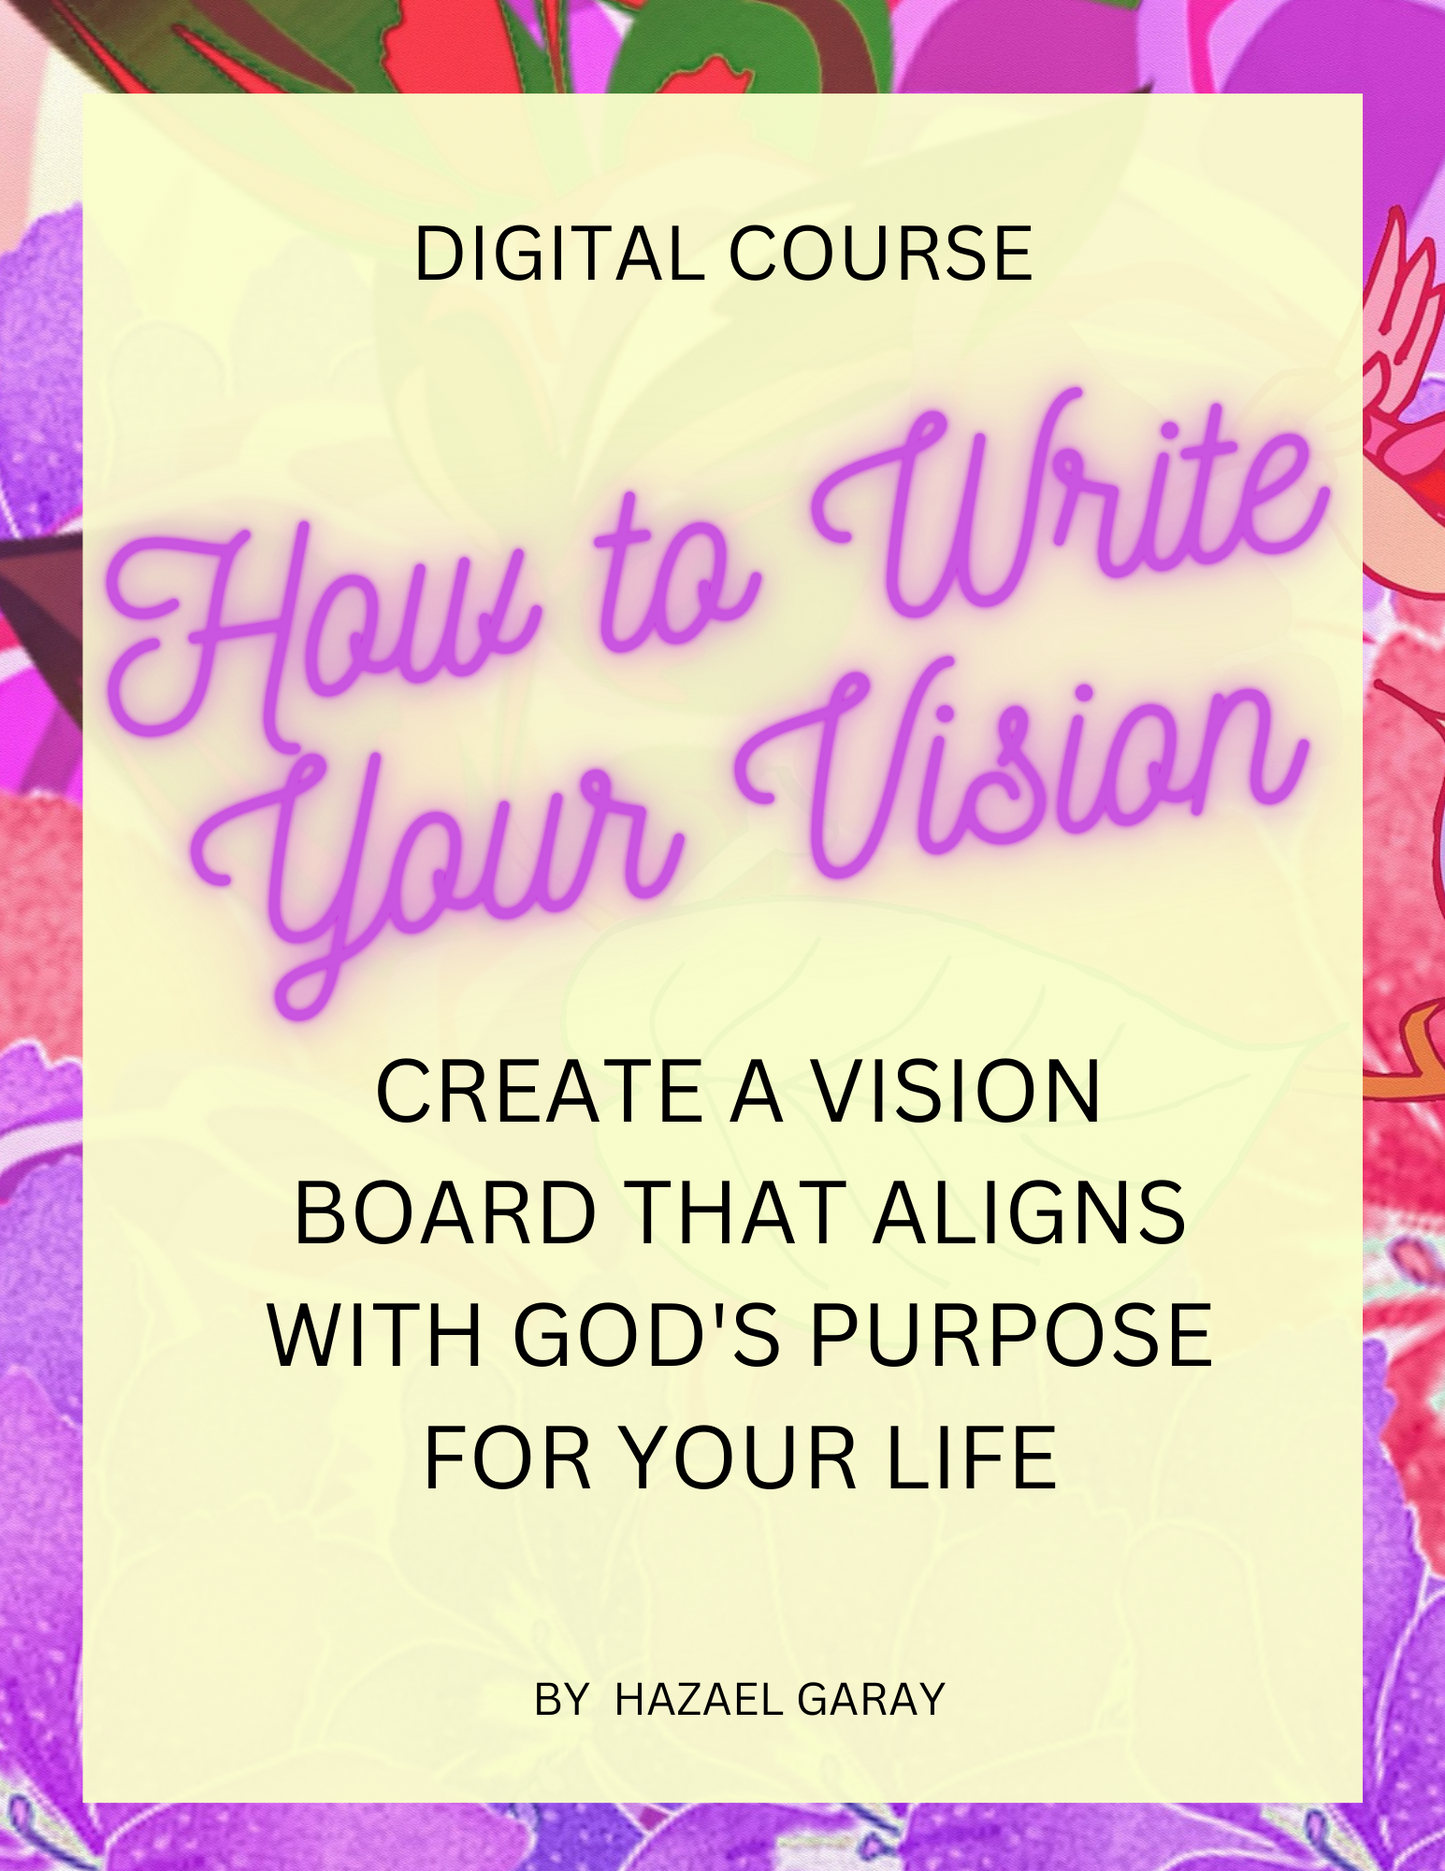 uy the Digital Course: HOW TO WRITE YOUR VISION - Unlock Your Full Potential